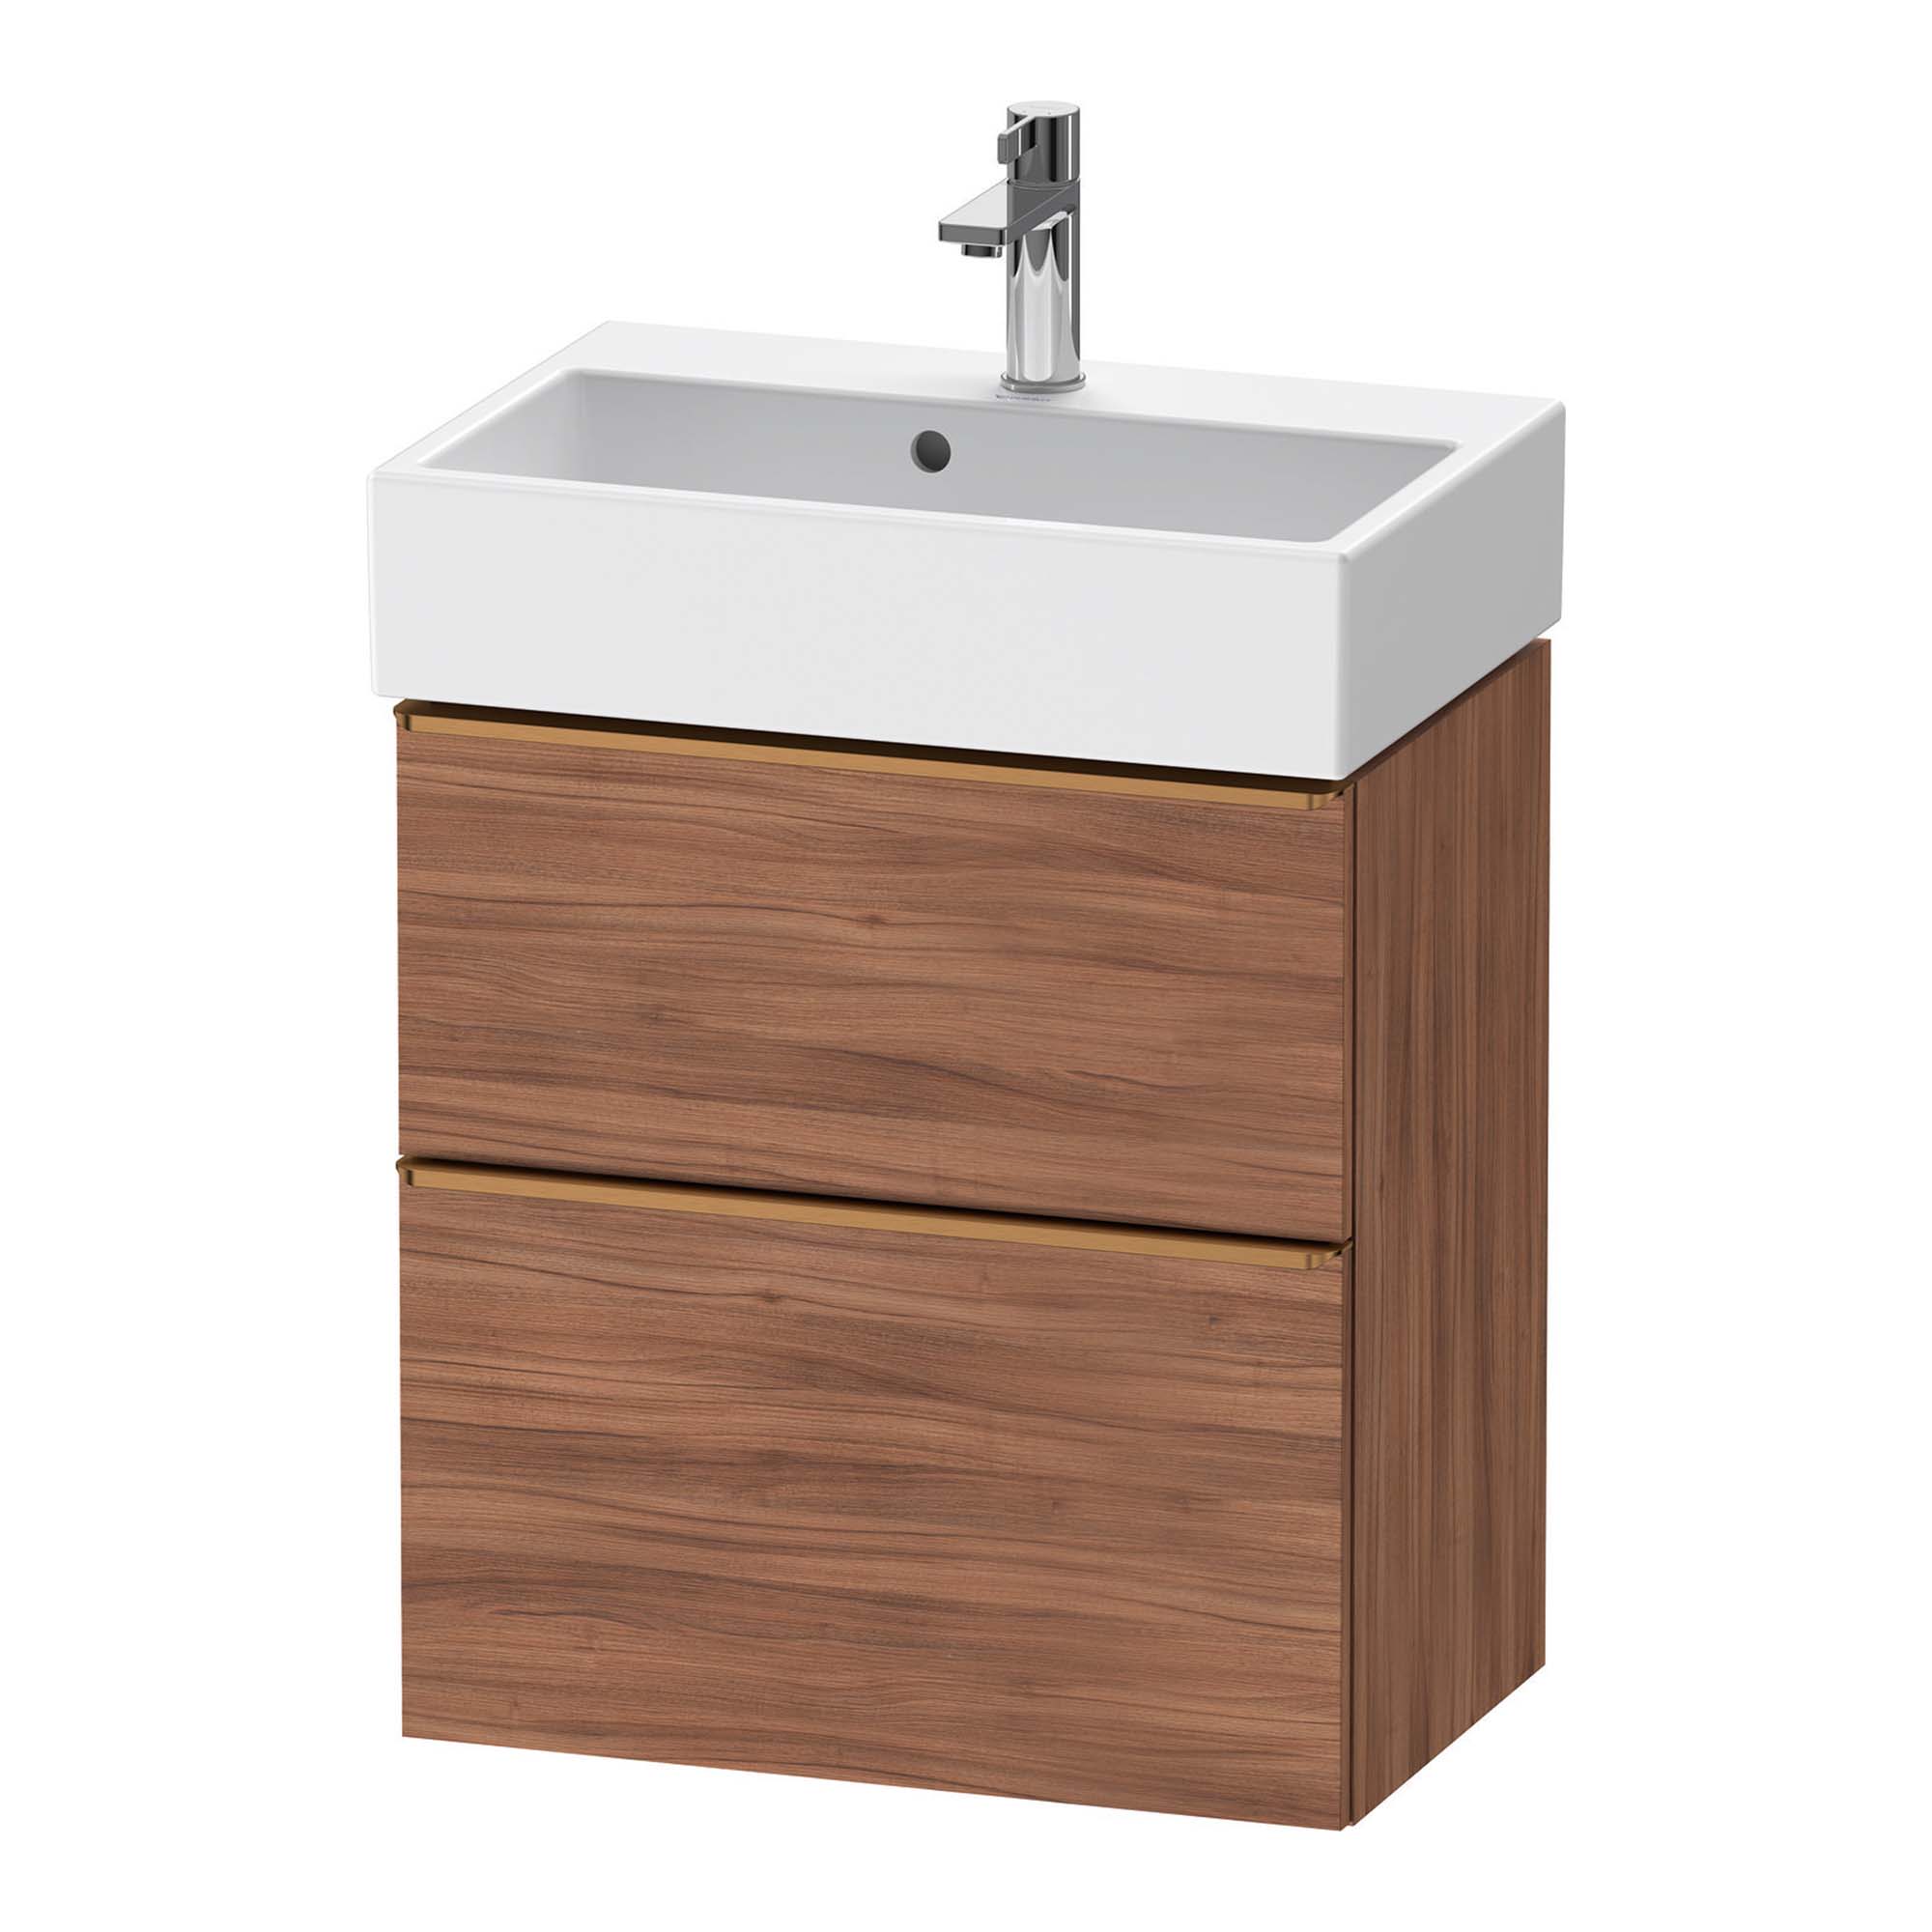 duravit d-neo 600 wall mounted vanity unit with vero basin walnut brushed bronze handles